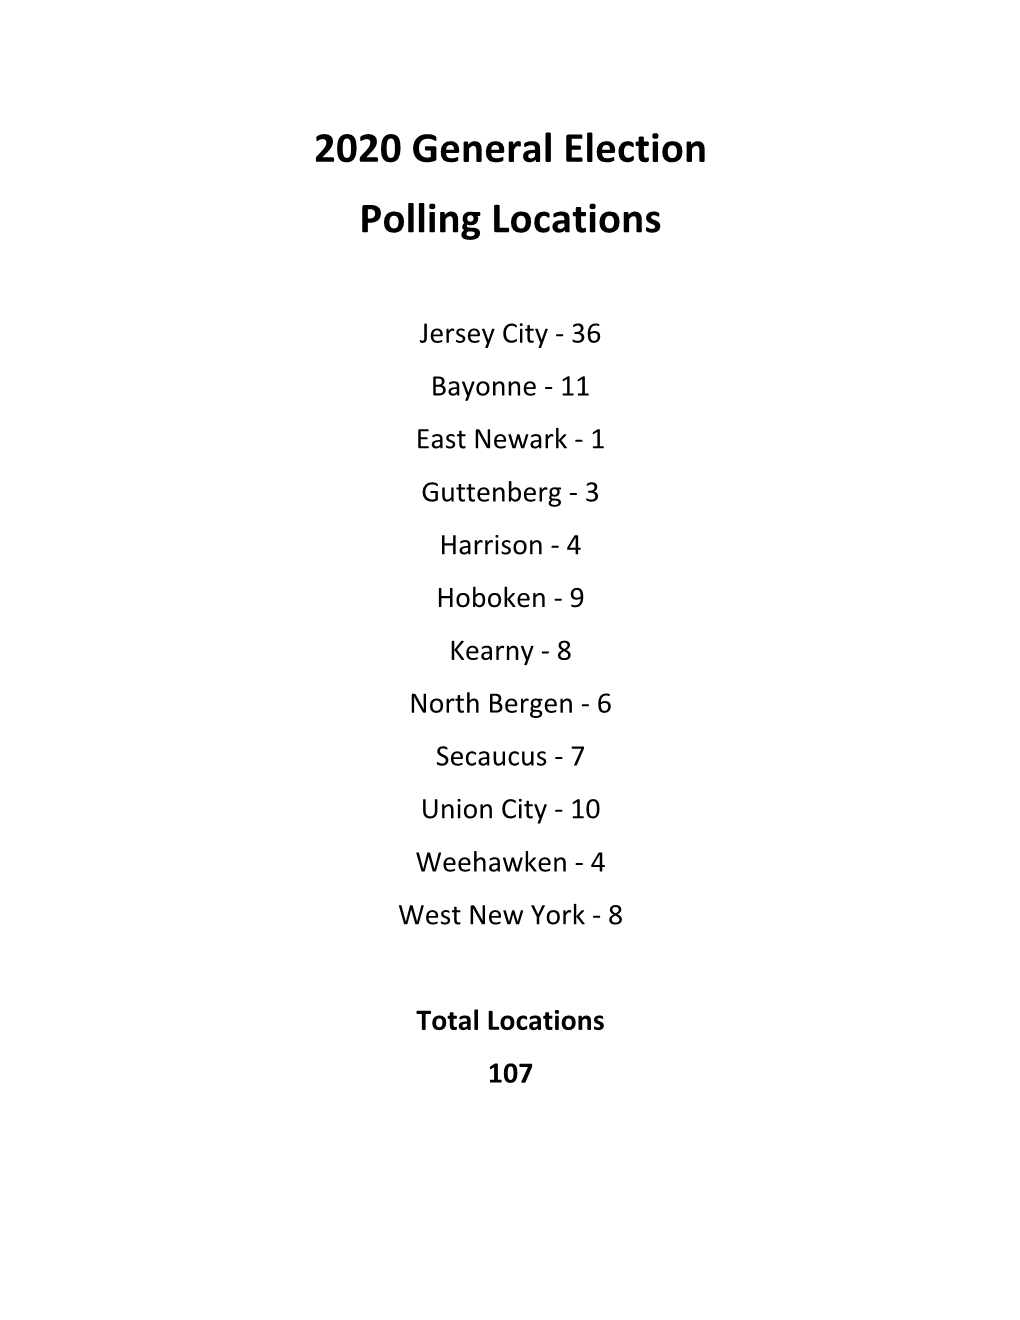 2020 General Election Polling Places